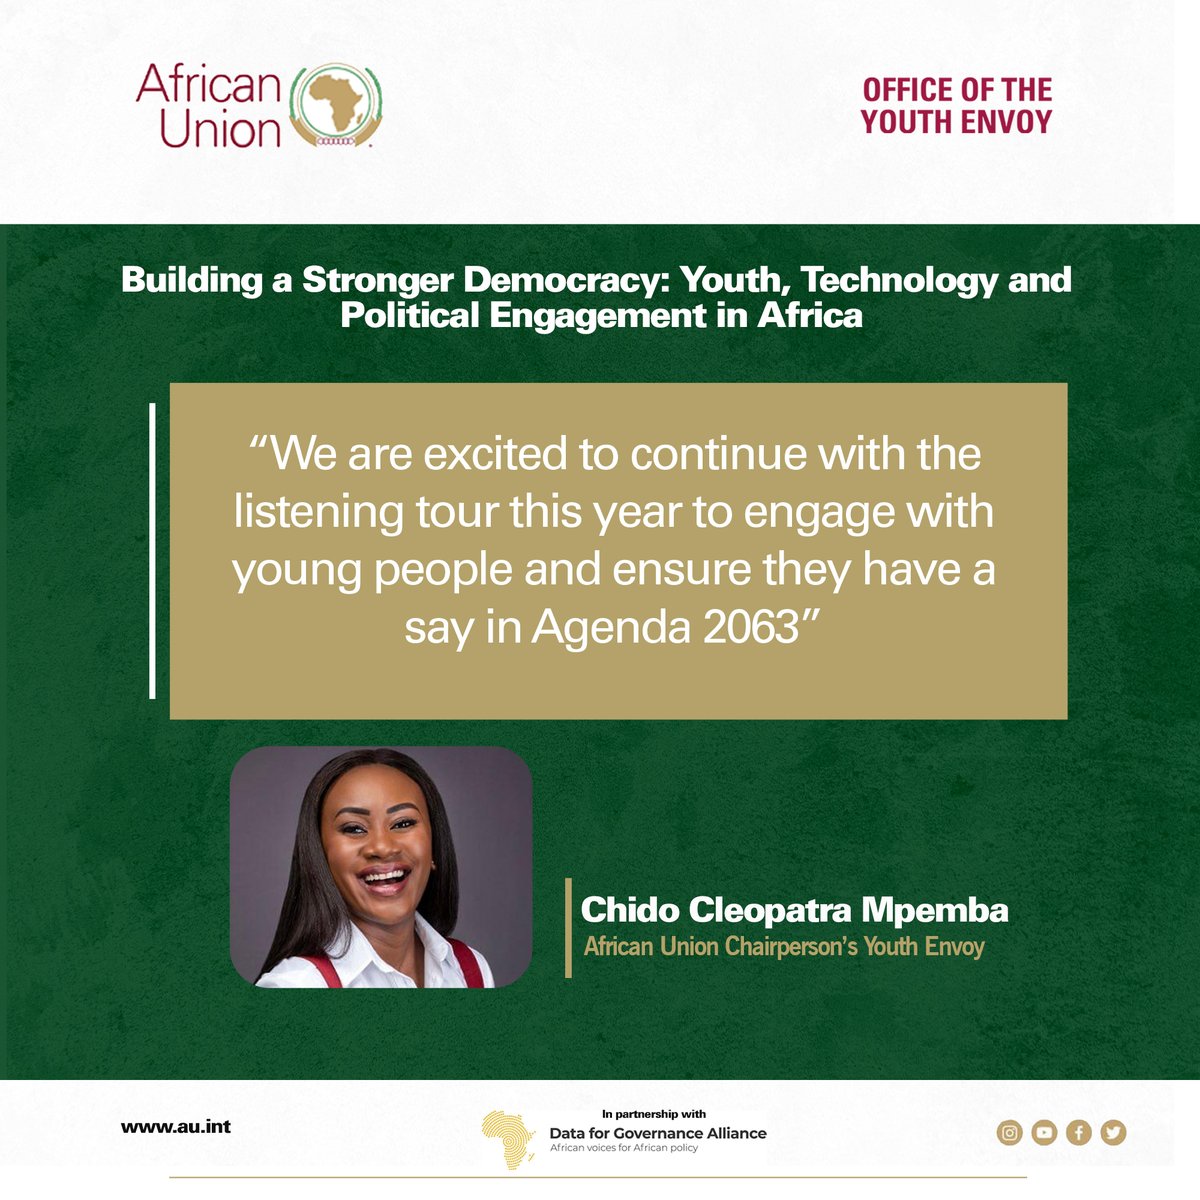 The @AU_YouthEnvoy is embarking on a listening tour this year to engage with young people and ensure they have a say in Agenda 2063.
She disclosed this at our ongoing joint webinar on youth, technology, and political participation.
#Tech4Gov